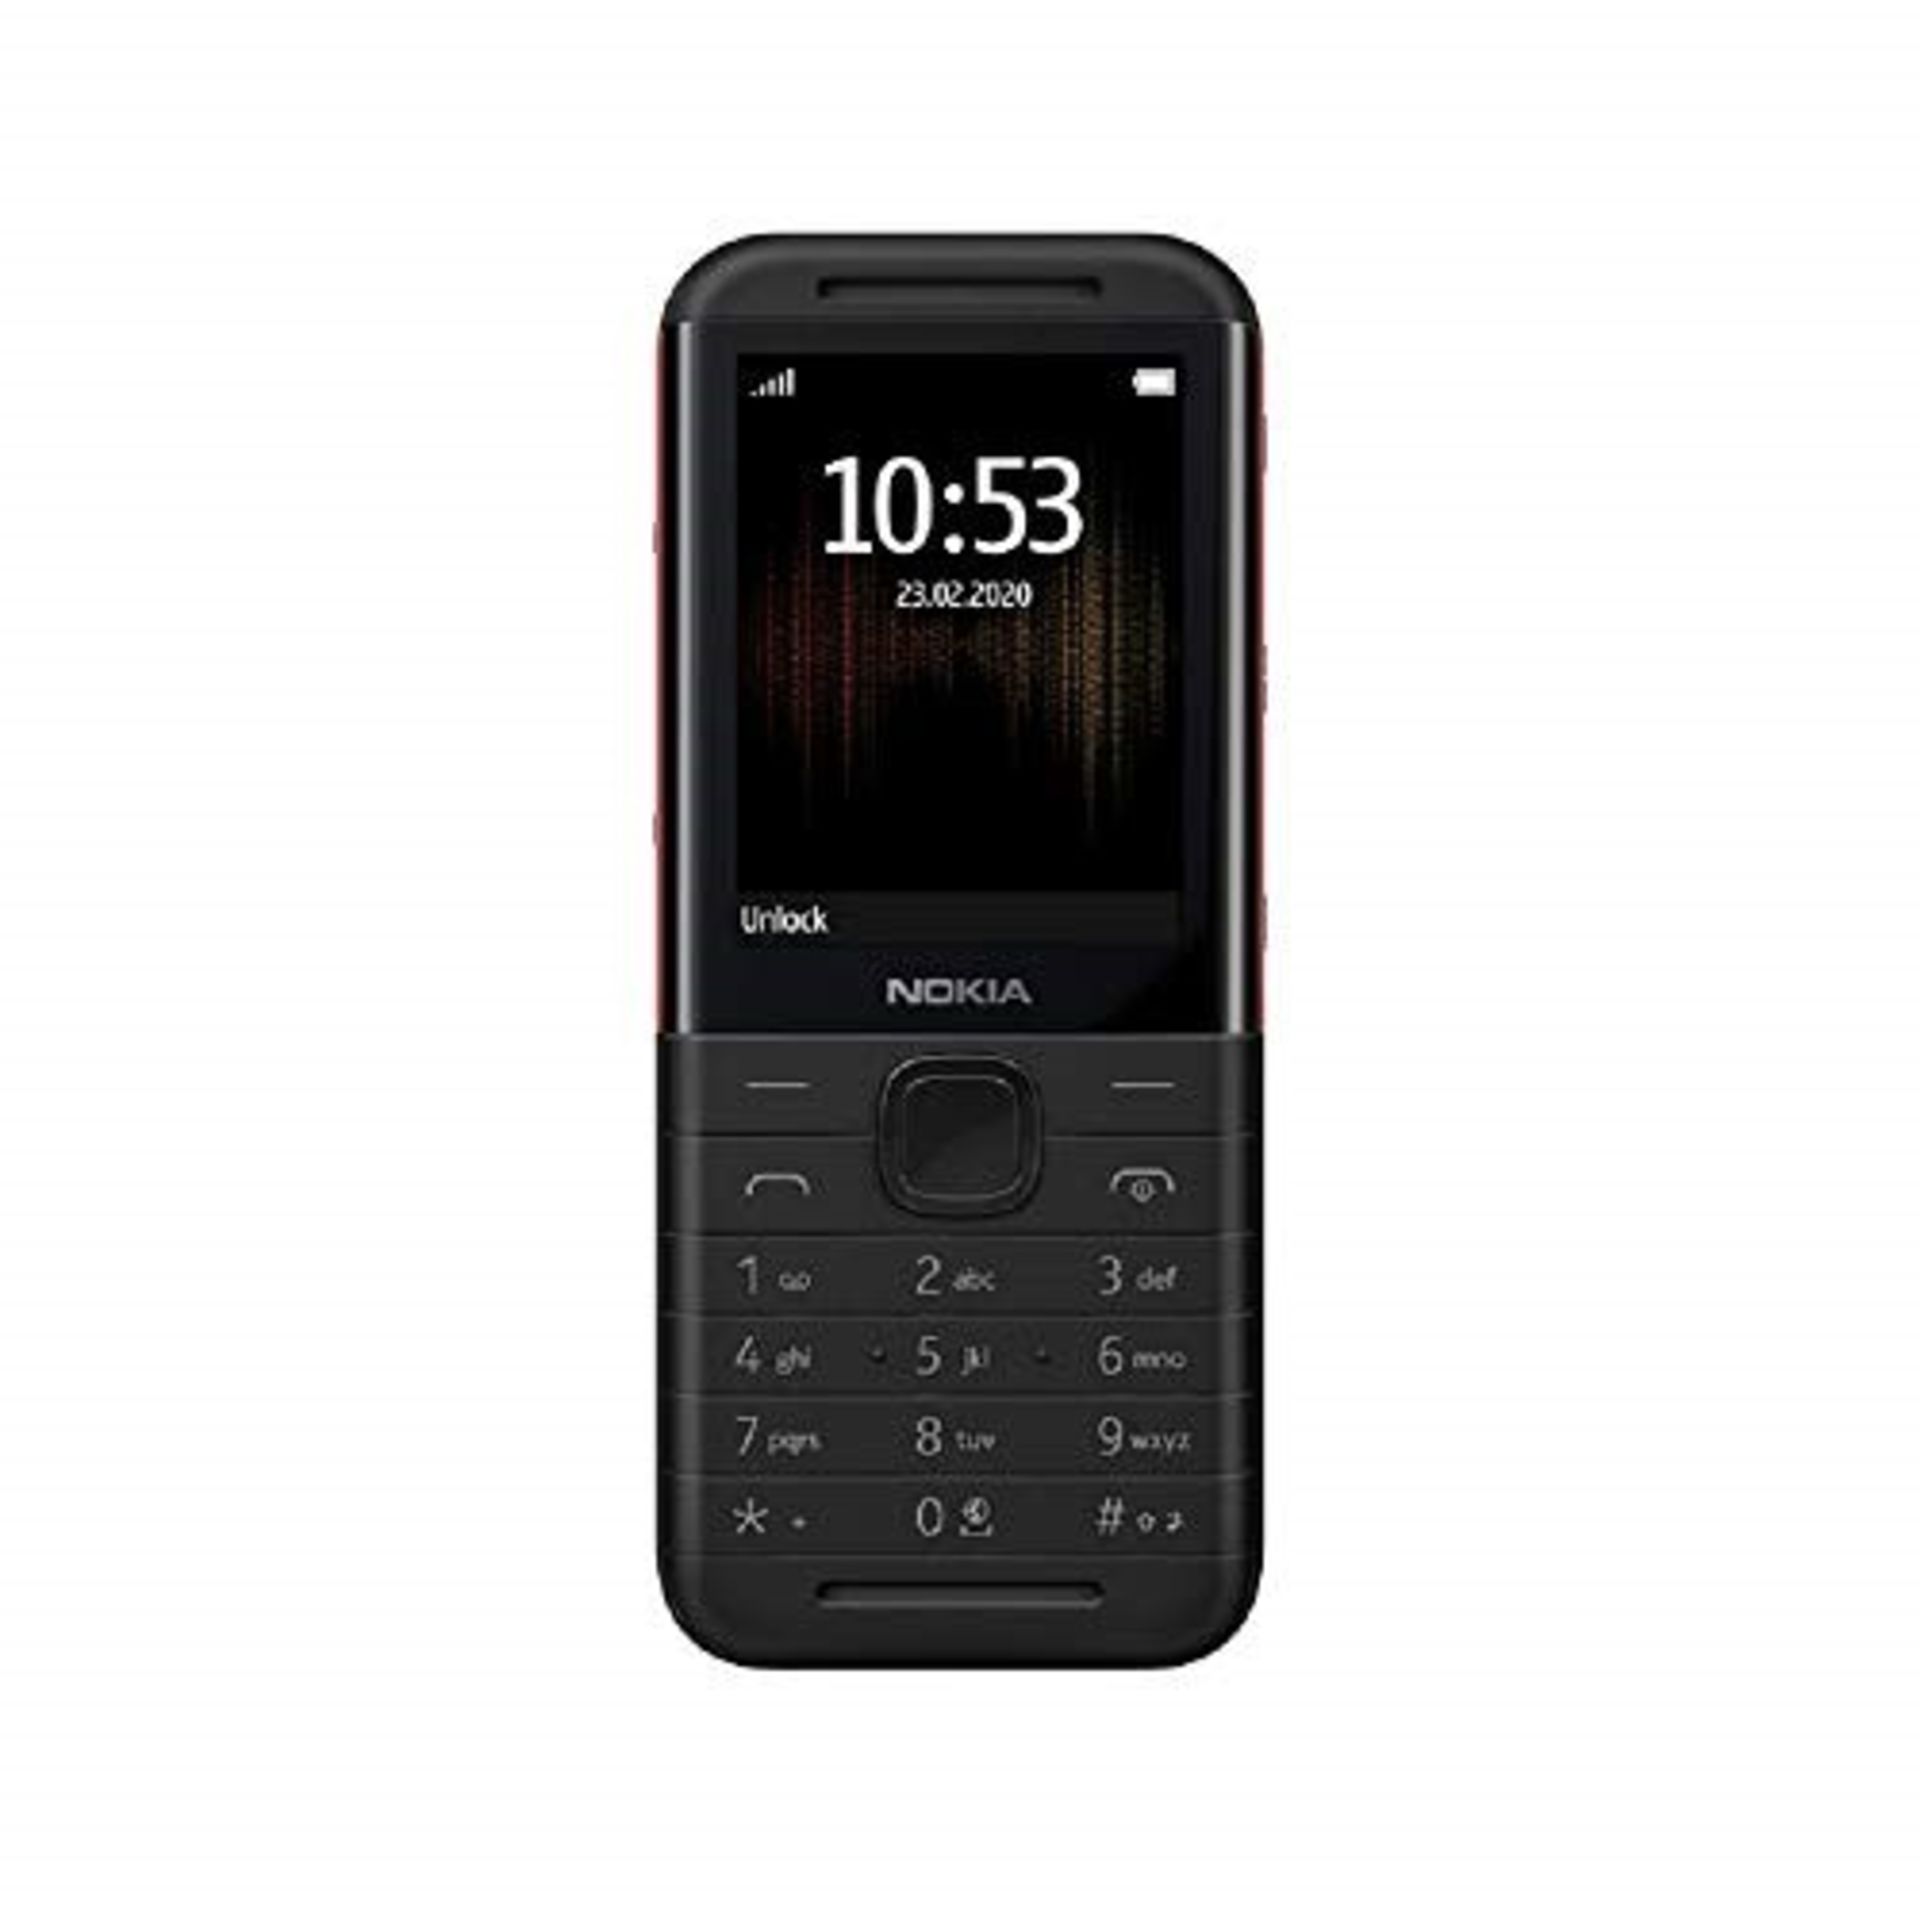 Nokia 5310 2.4 Inch 8 MB UK SIM-Free 2G Feature